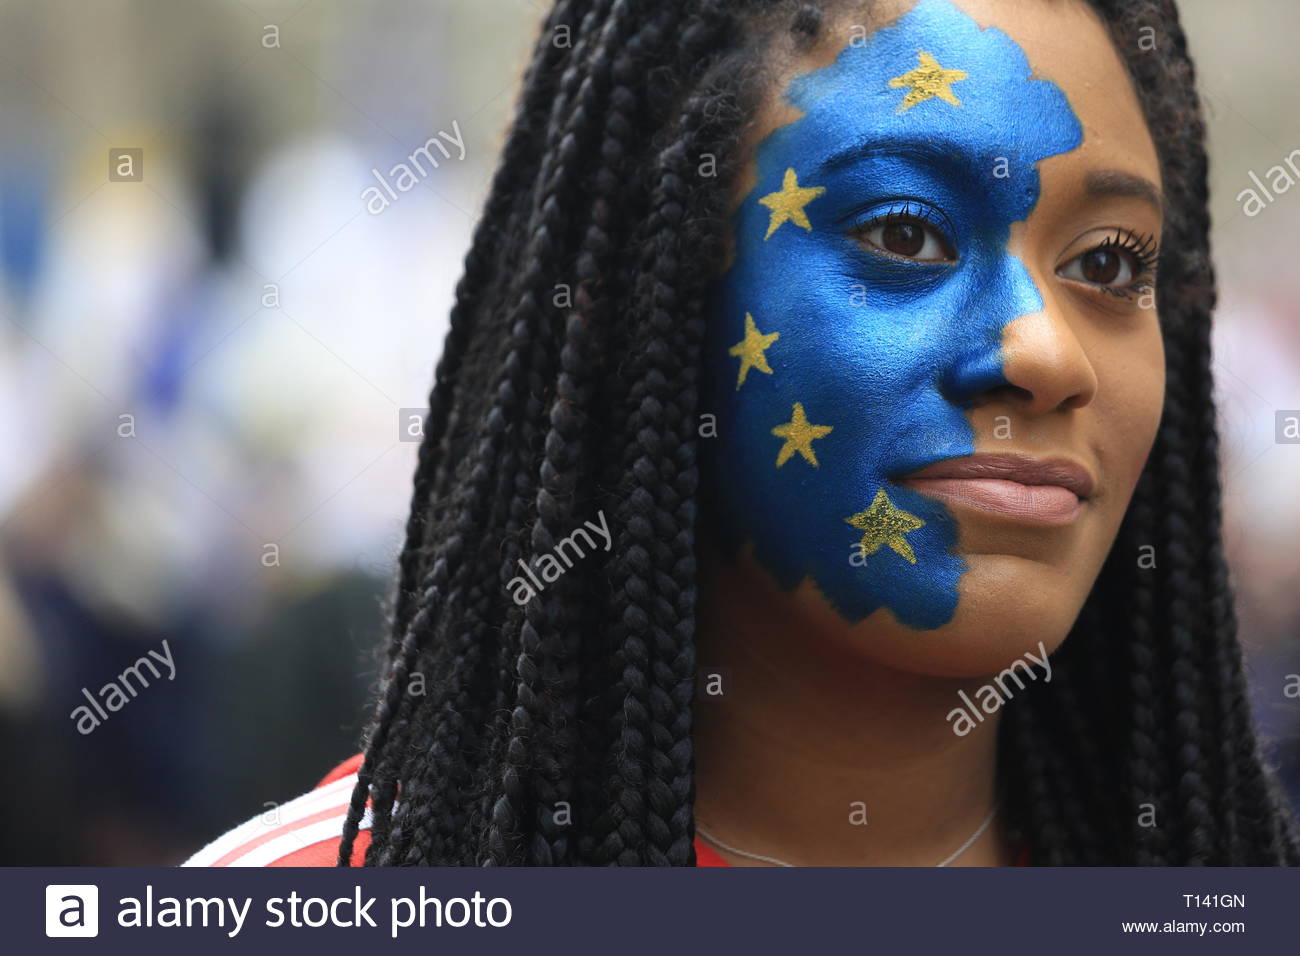 London, UK. 23rd Mar 2019. Supporters of a final say on leaving the EU have started gathering in London for the protest which will end up in Westminster. This young woman was photographed near Park lane. Speakers so far have included Caroline Lucas and Clive Lewis. Credit: Clearpix/Alamy Live News Credit: Clearpix/Alamy Live News Stock Photo